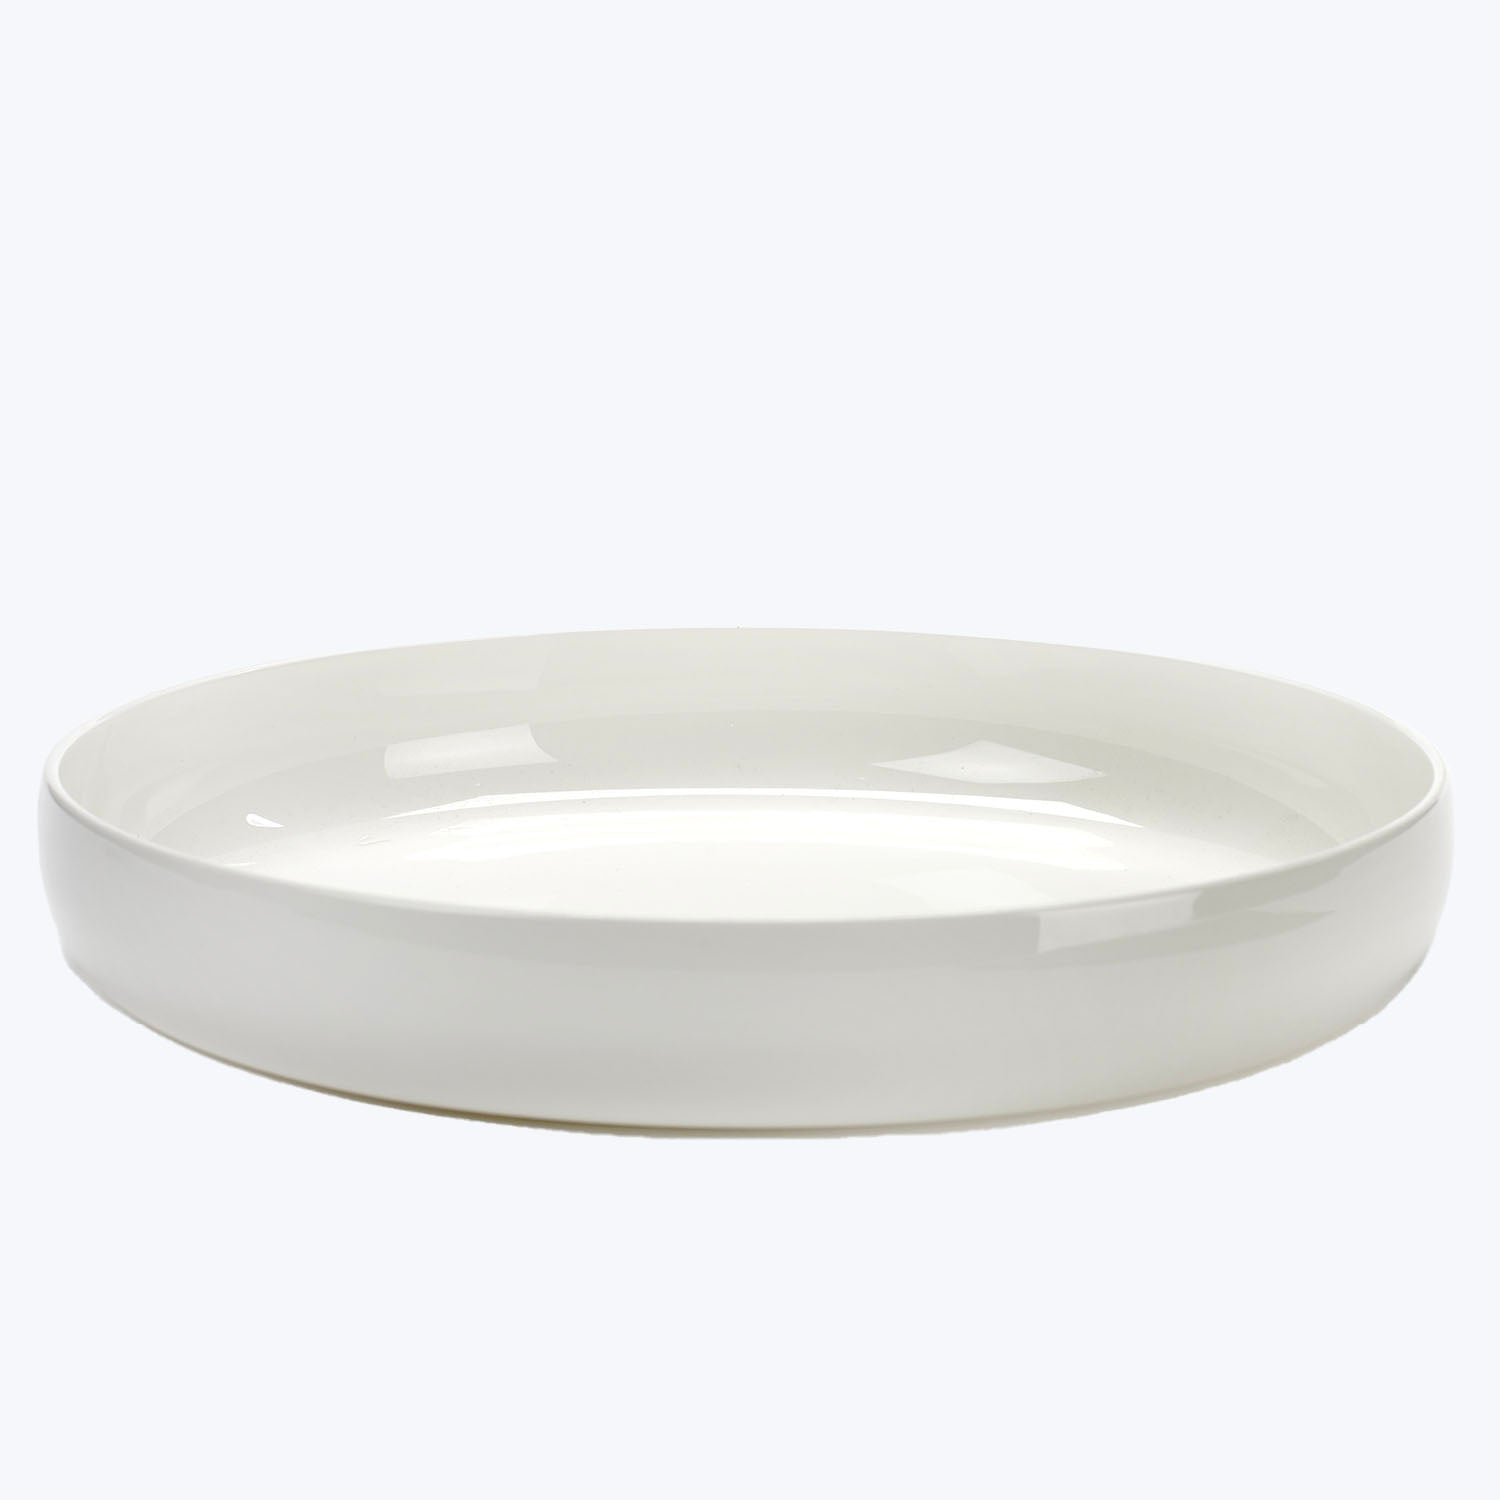 Piet Boon Base Tableware Collection-Matte White-XS Plate (Set of 8)